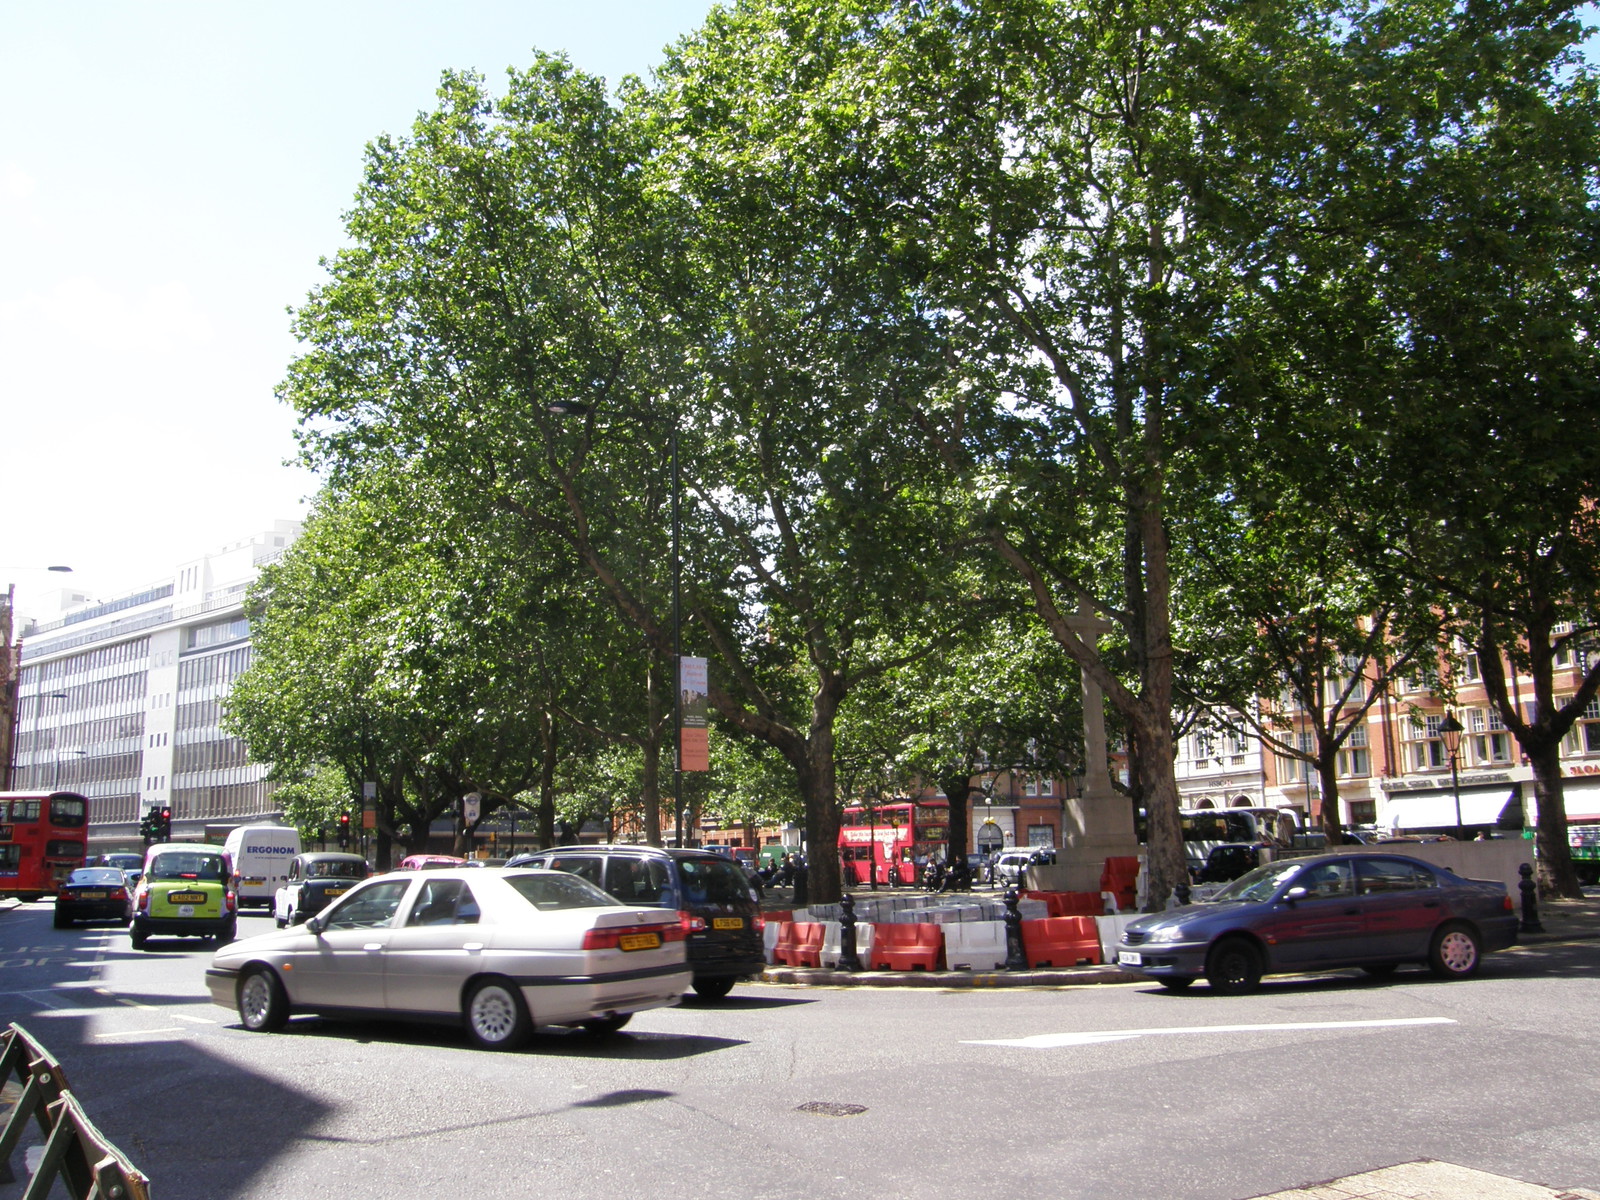 Image from Turnham Green and Kensington (Olympia) to Victoria